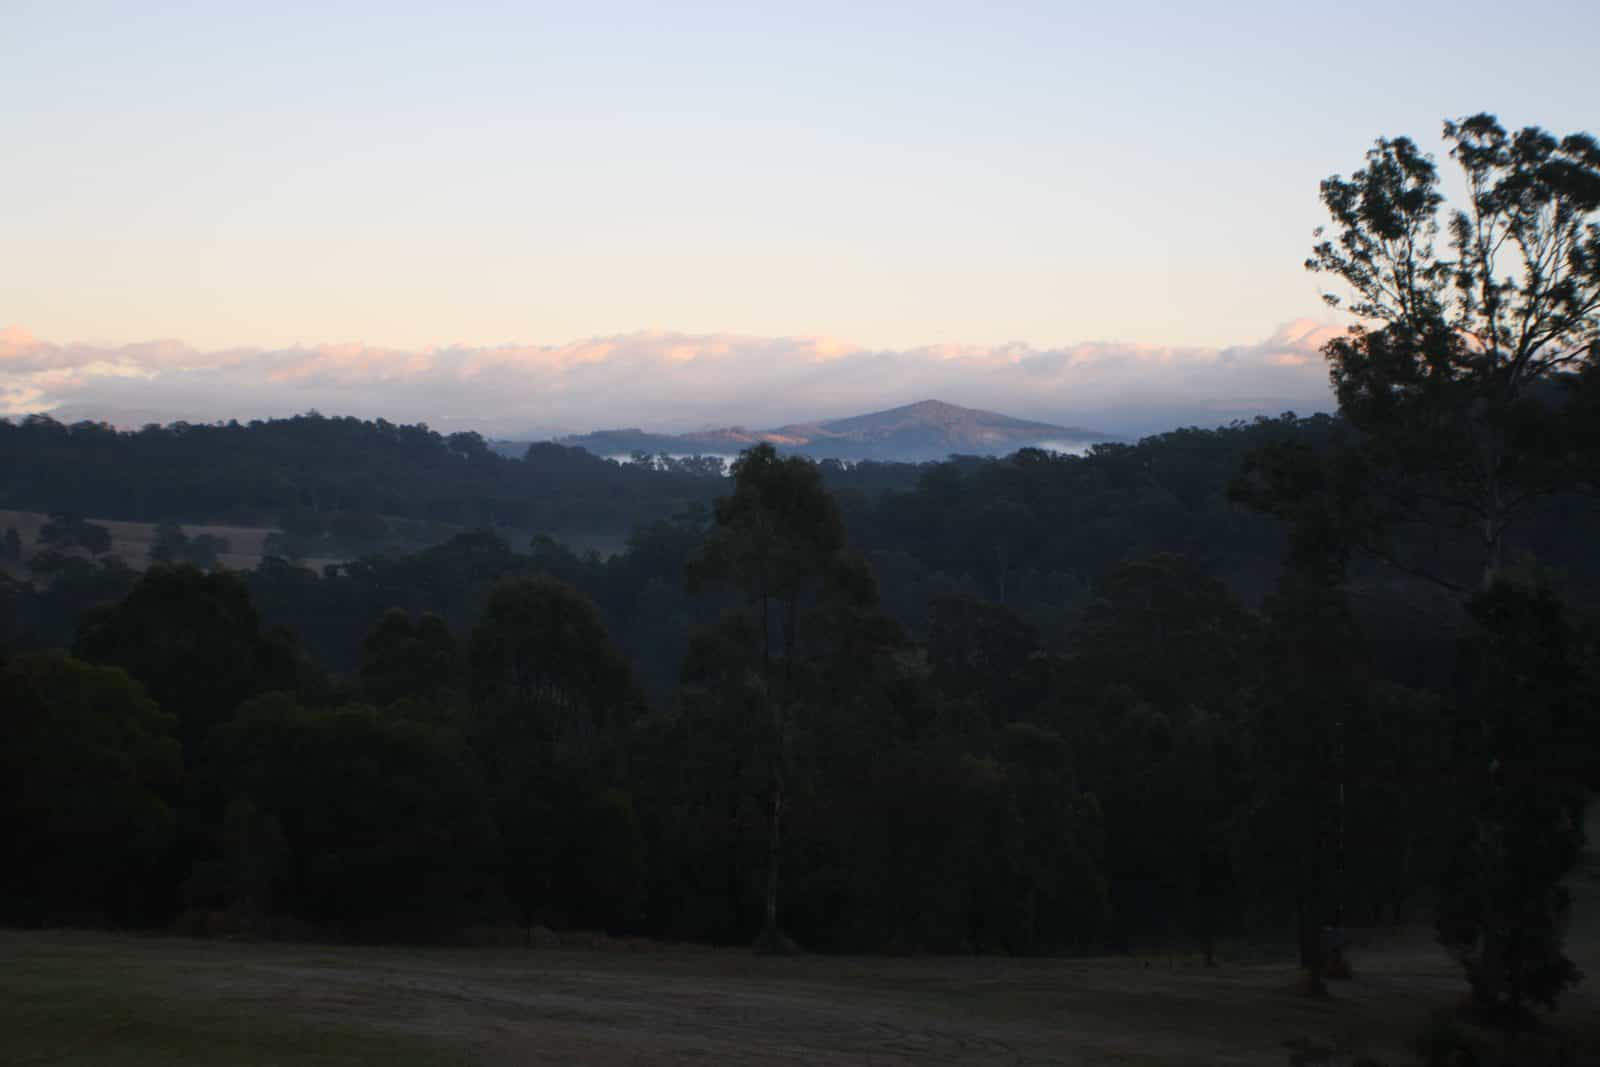 View of Barrington Tops